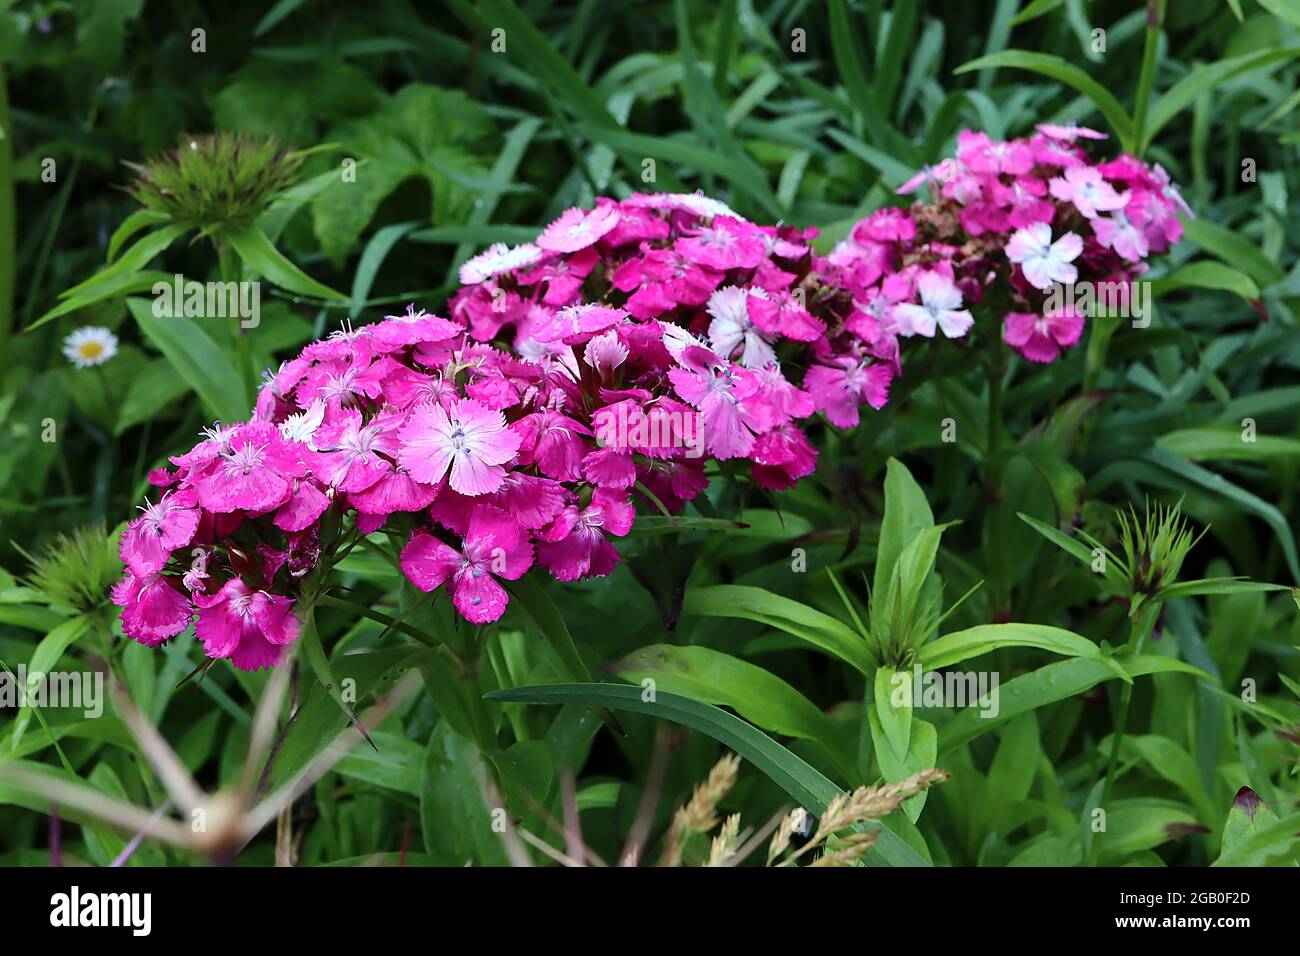 Dianthus barbatus ‘Dash Magician’ Sweet William Dash Magician – domed flower heads of white, medium and deep pink flowers with fringed petals,  June, Stock Photo